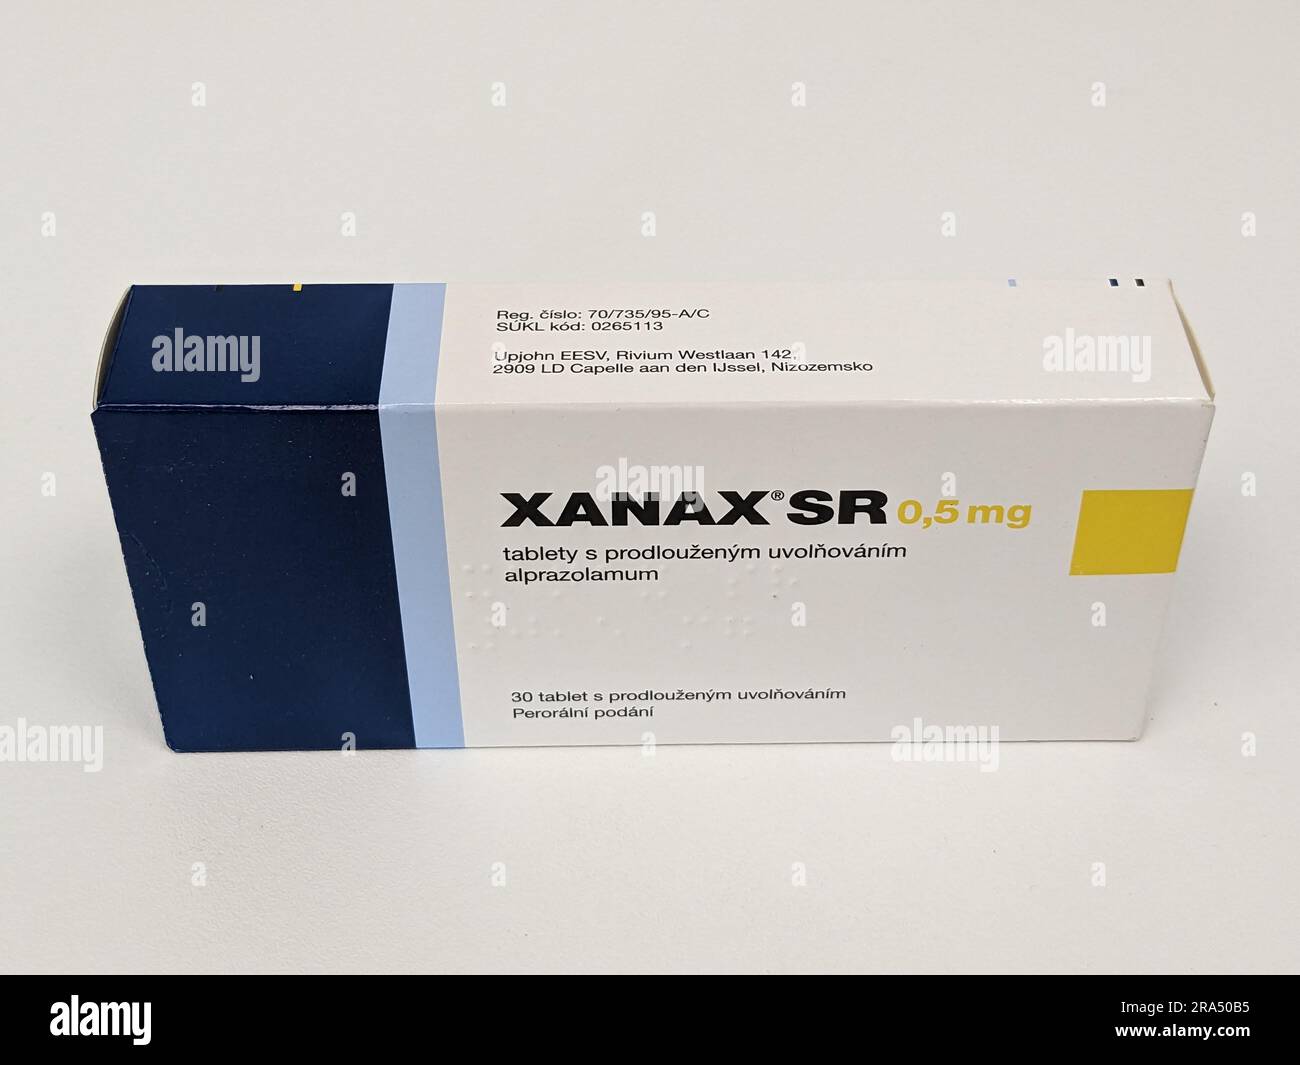 Xanax pills with active substance Alprazolam,anxiolytic anti-depressant medication therapy drugs,is popular drug to abuse and has street value Pfizer Stock Photo